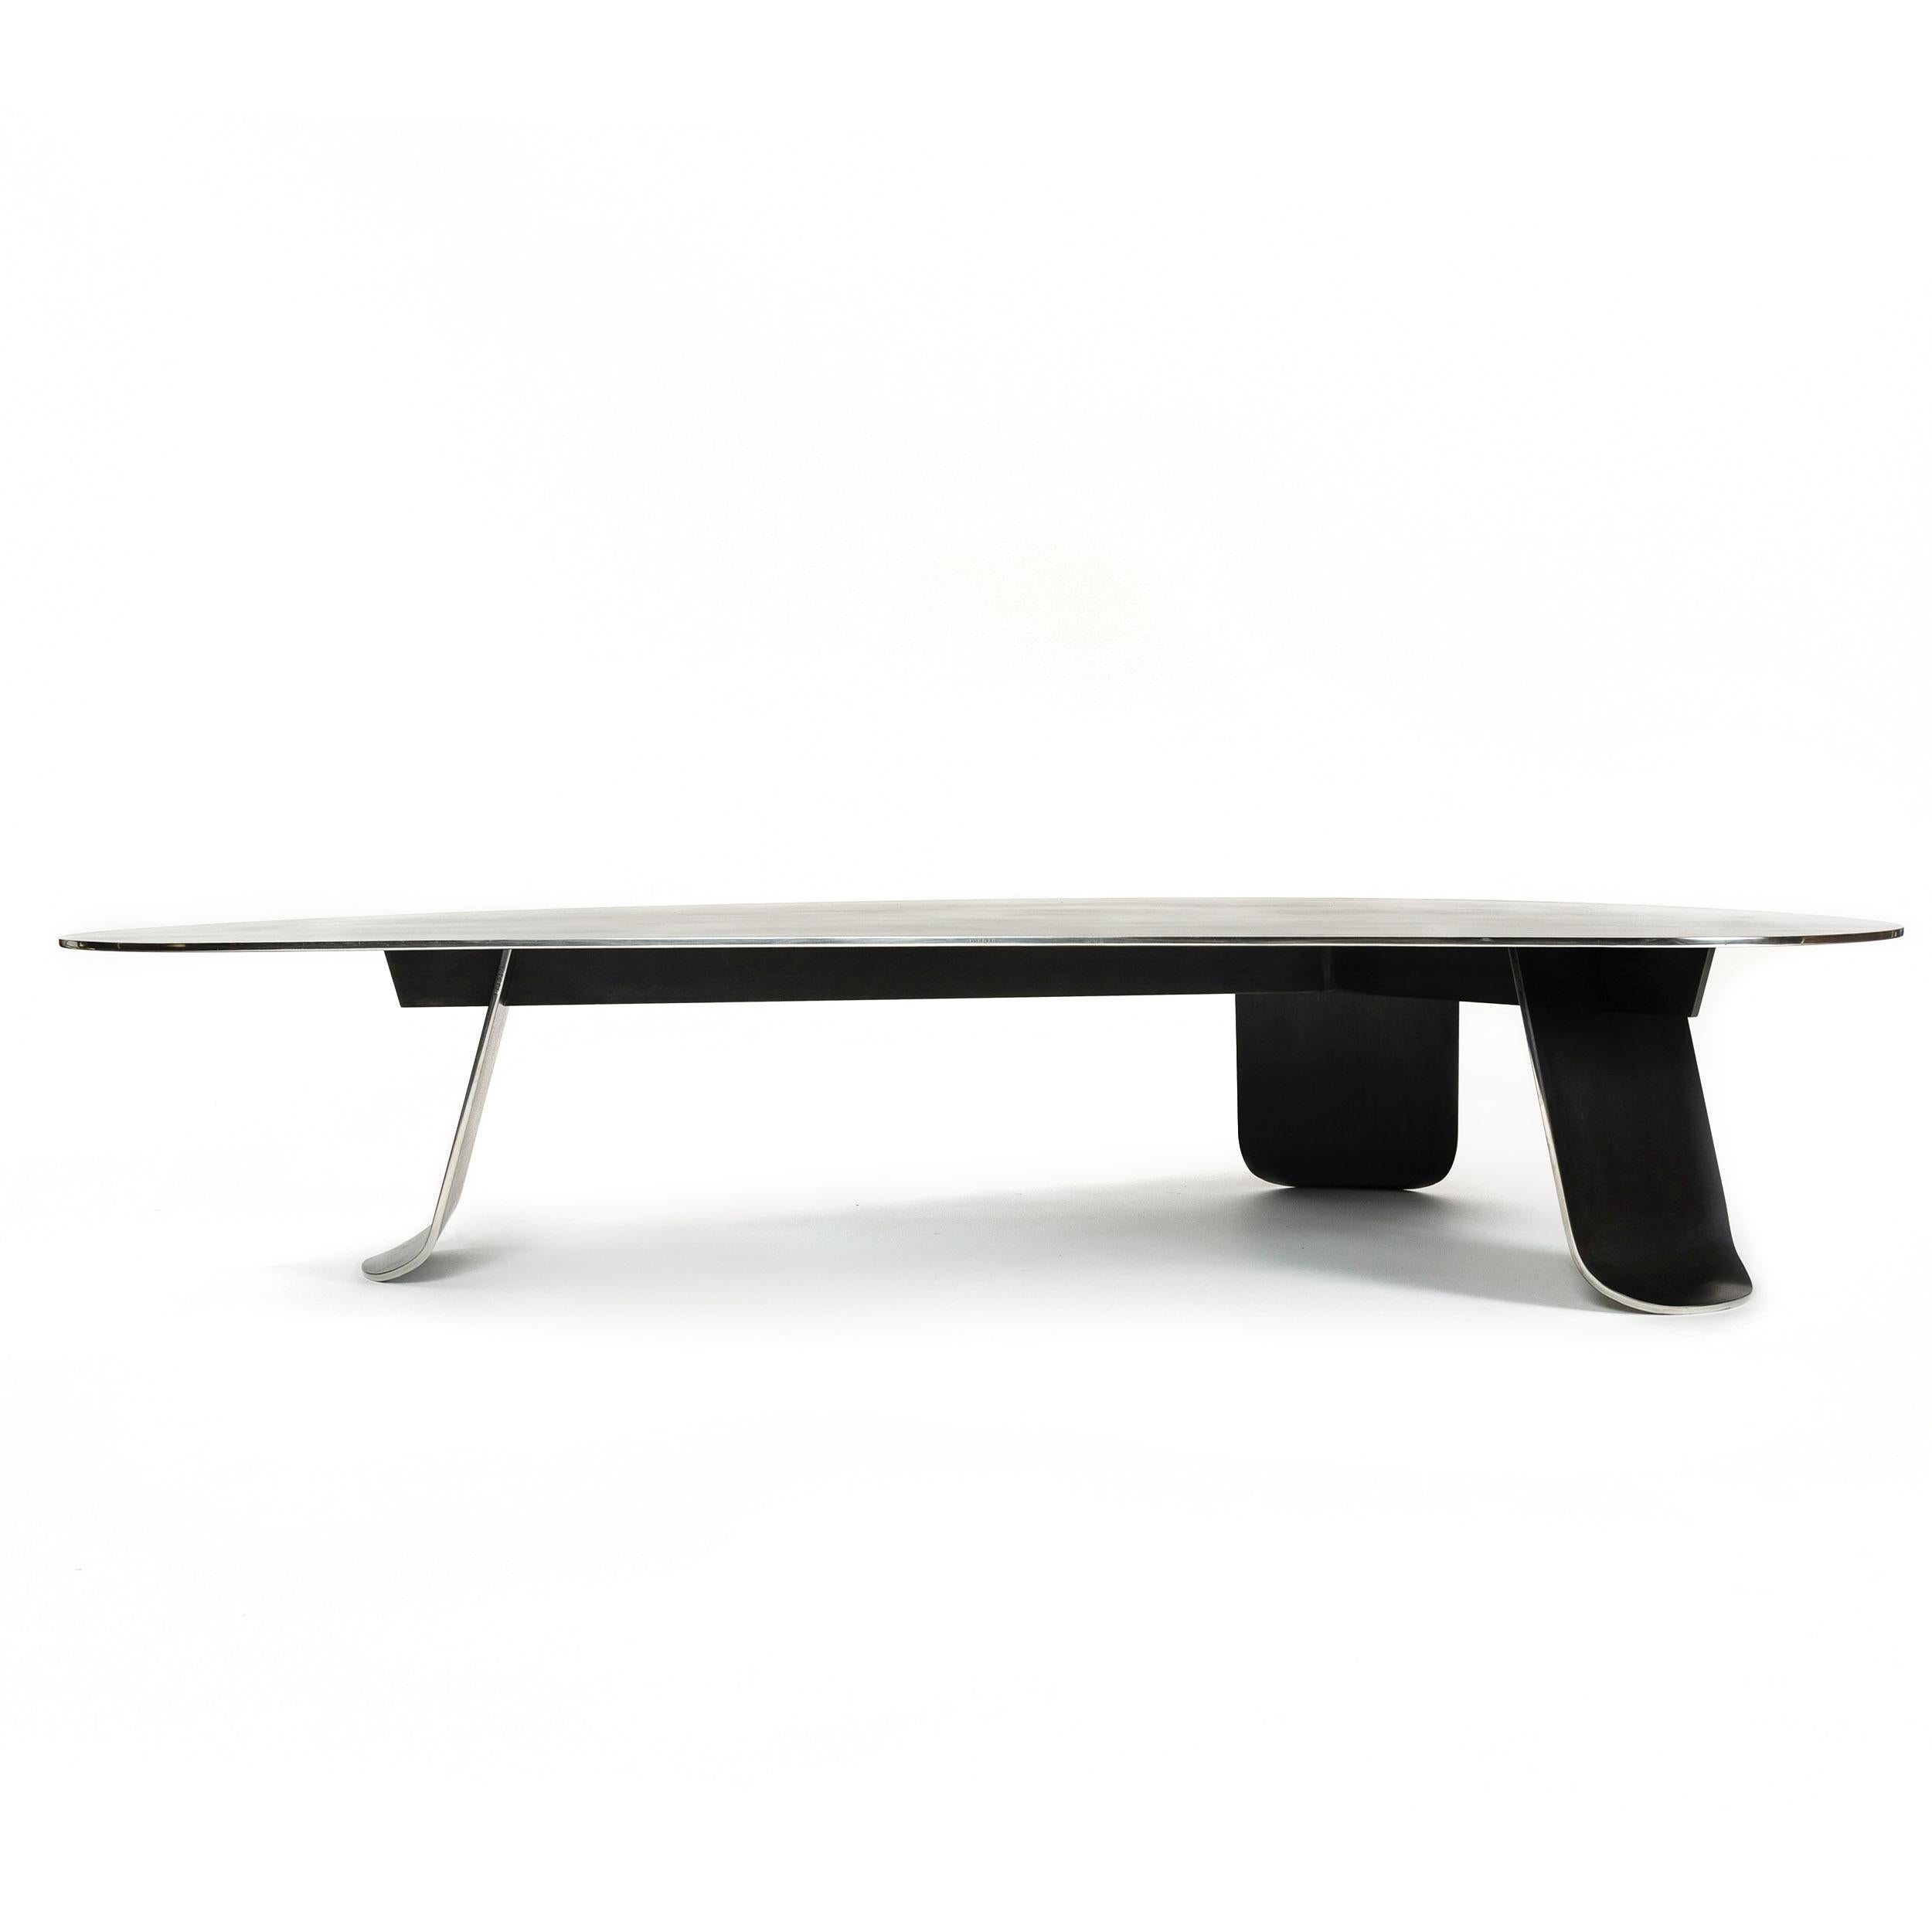 American Wyeth Chrysalis Table No. 1 in Blackened Stainless Steel with Polished Edges For Sale